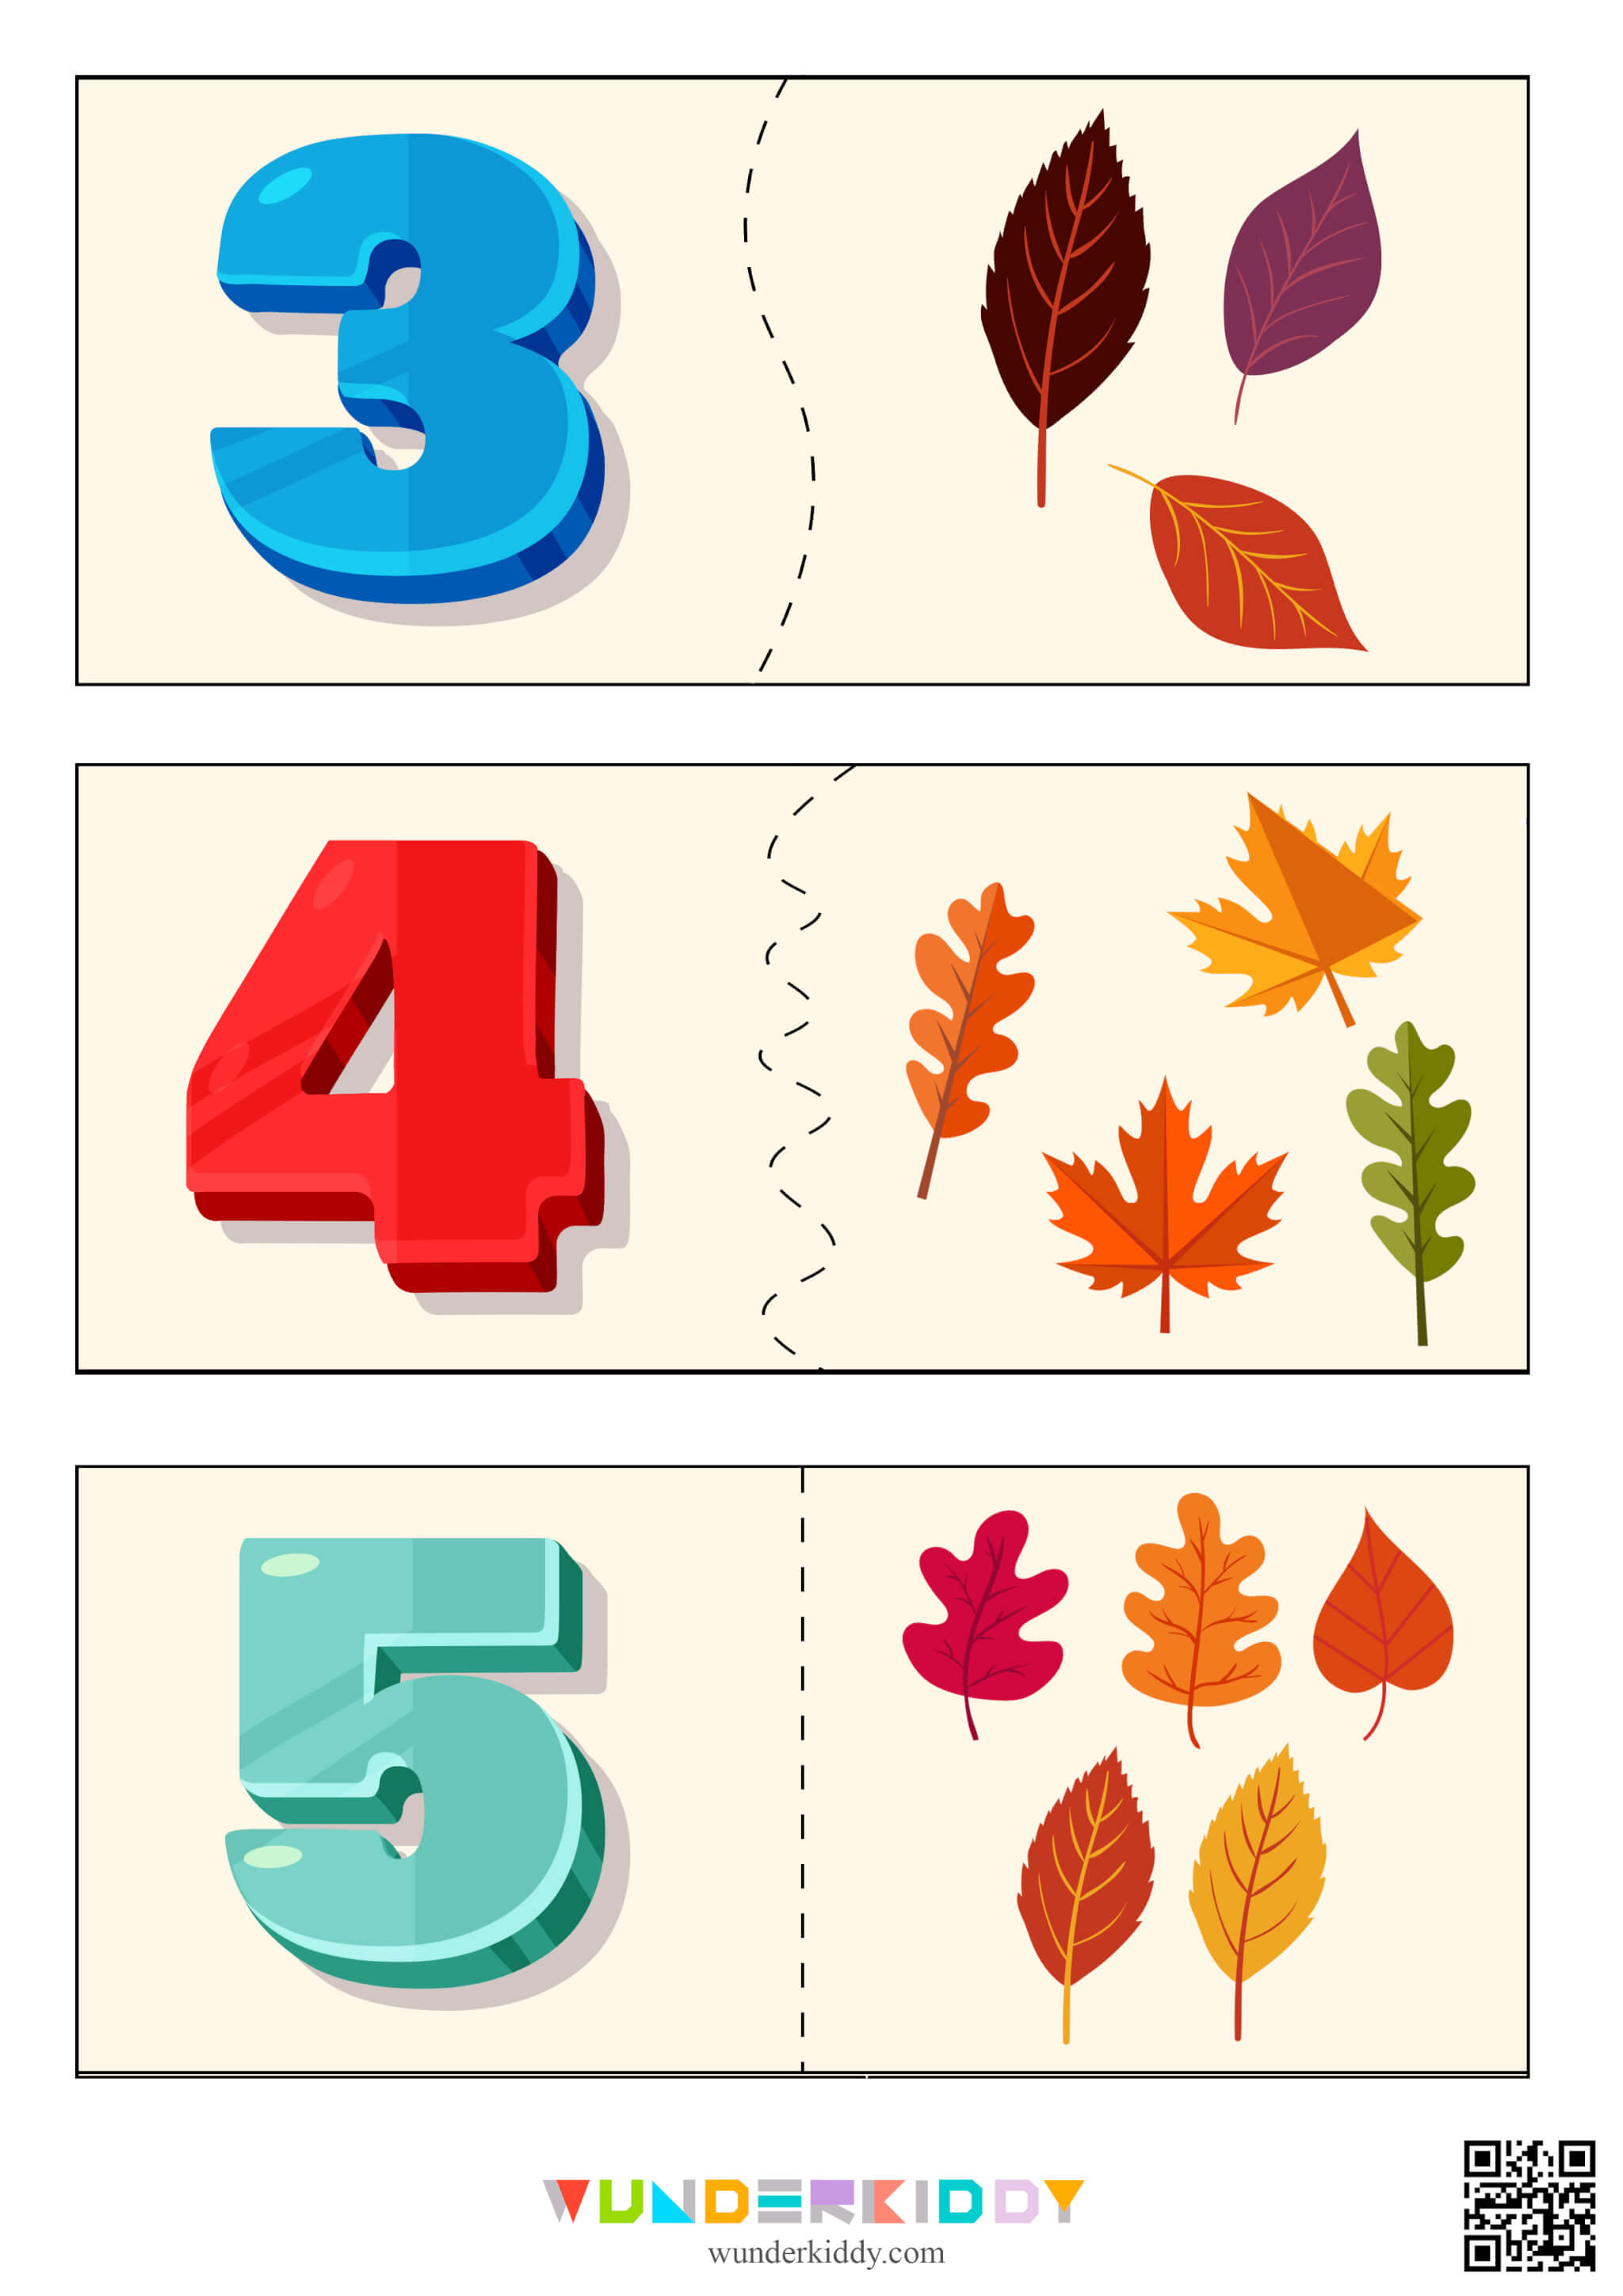 Flash cards «Counting leaves» - Image 3